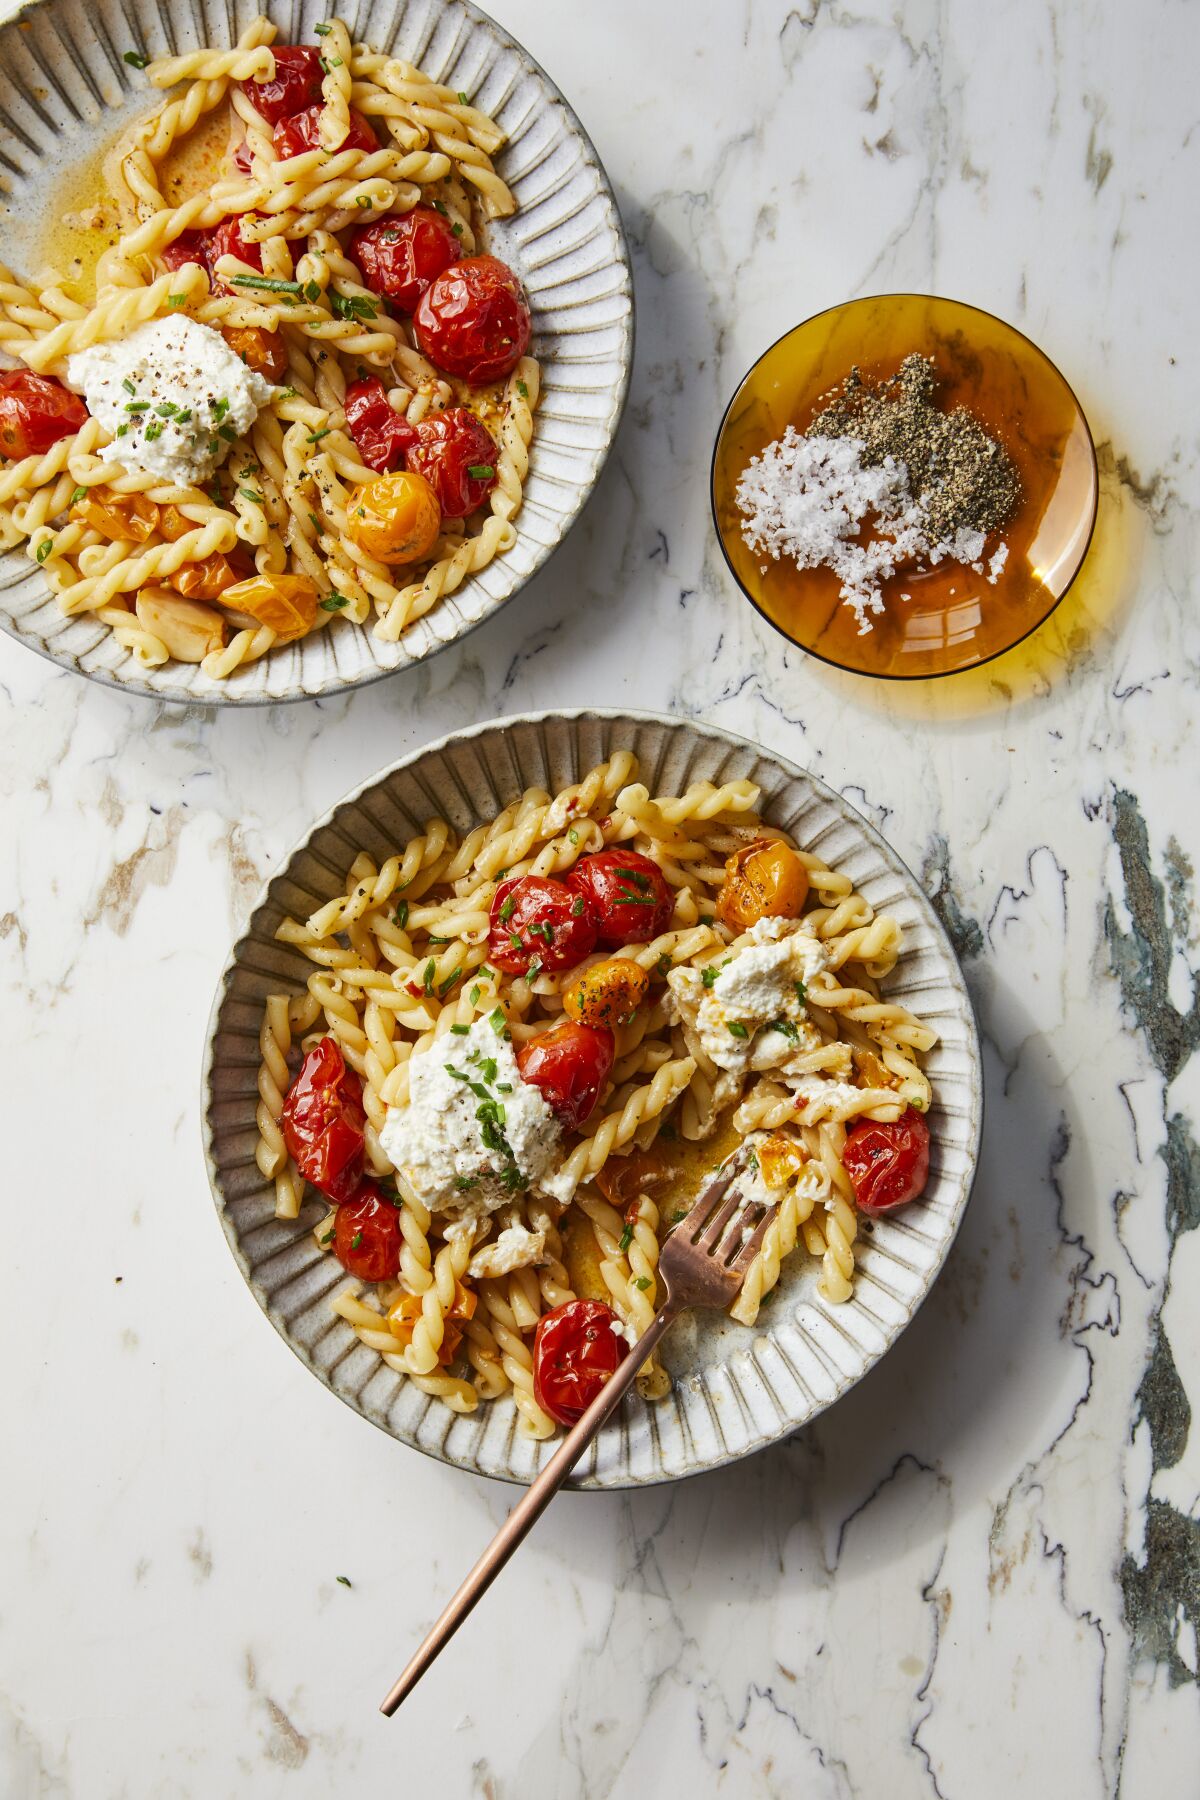 A Moroccan-inspired carrot salad and simple tomato and ricotta pasta.